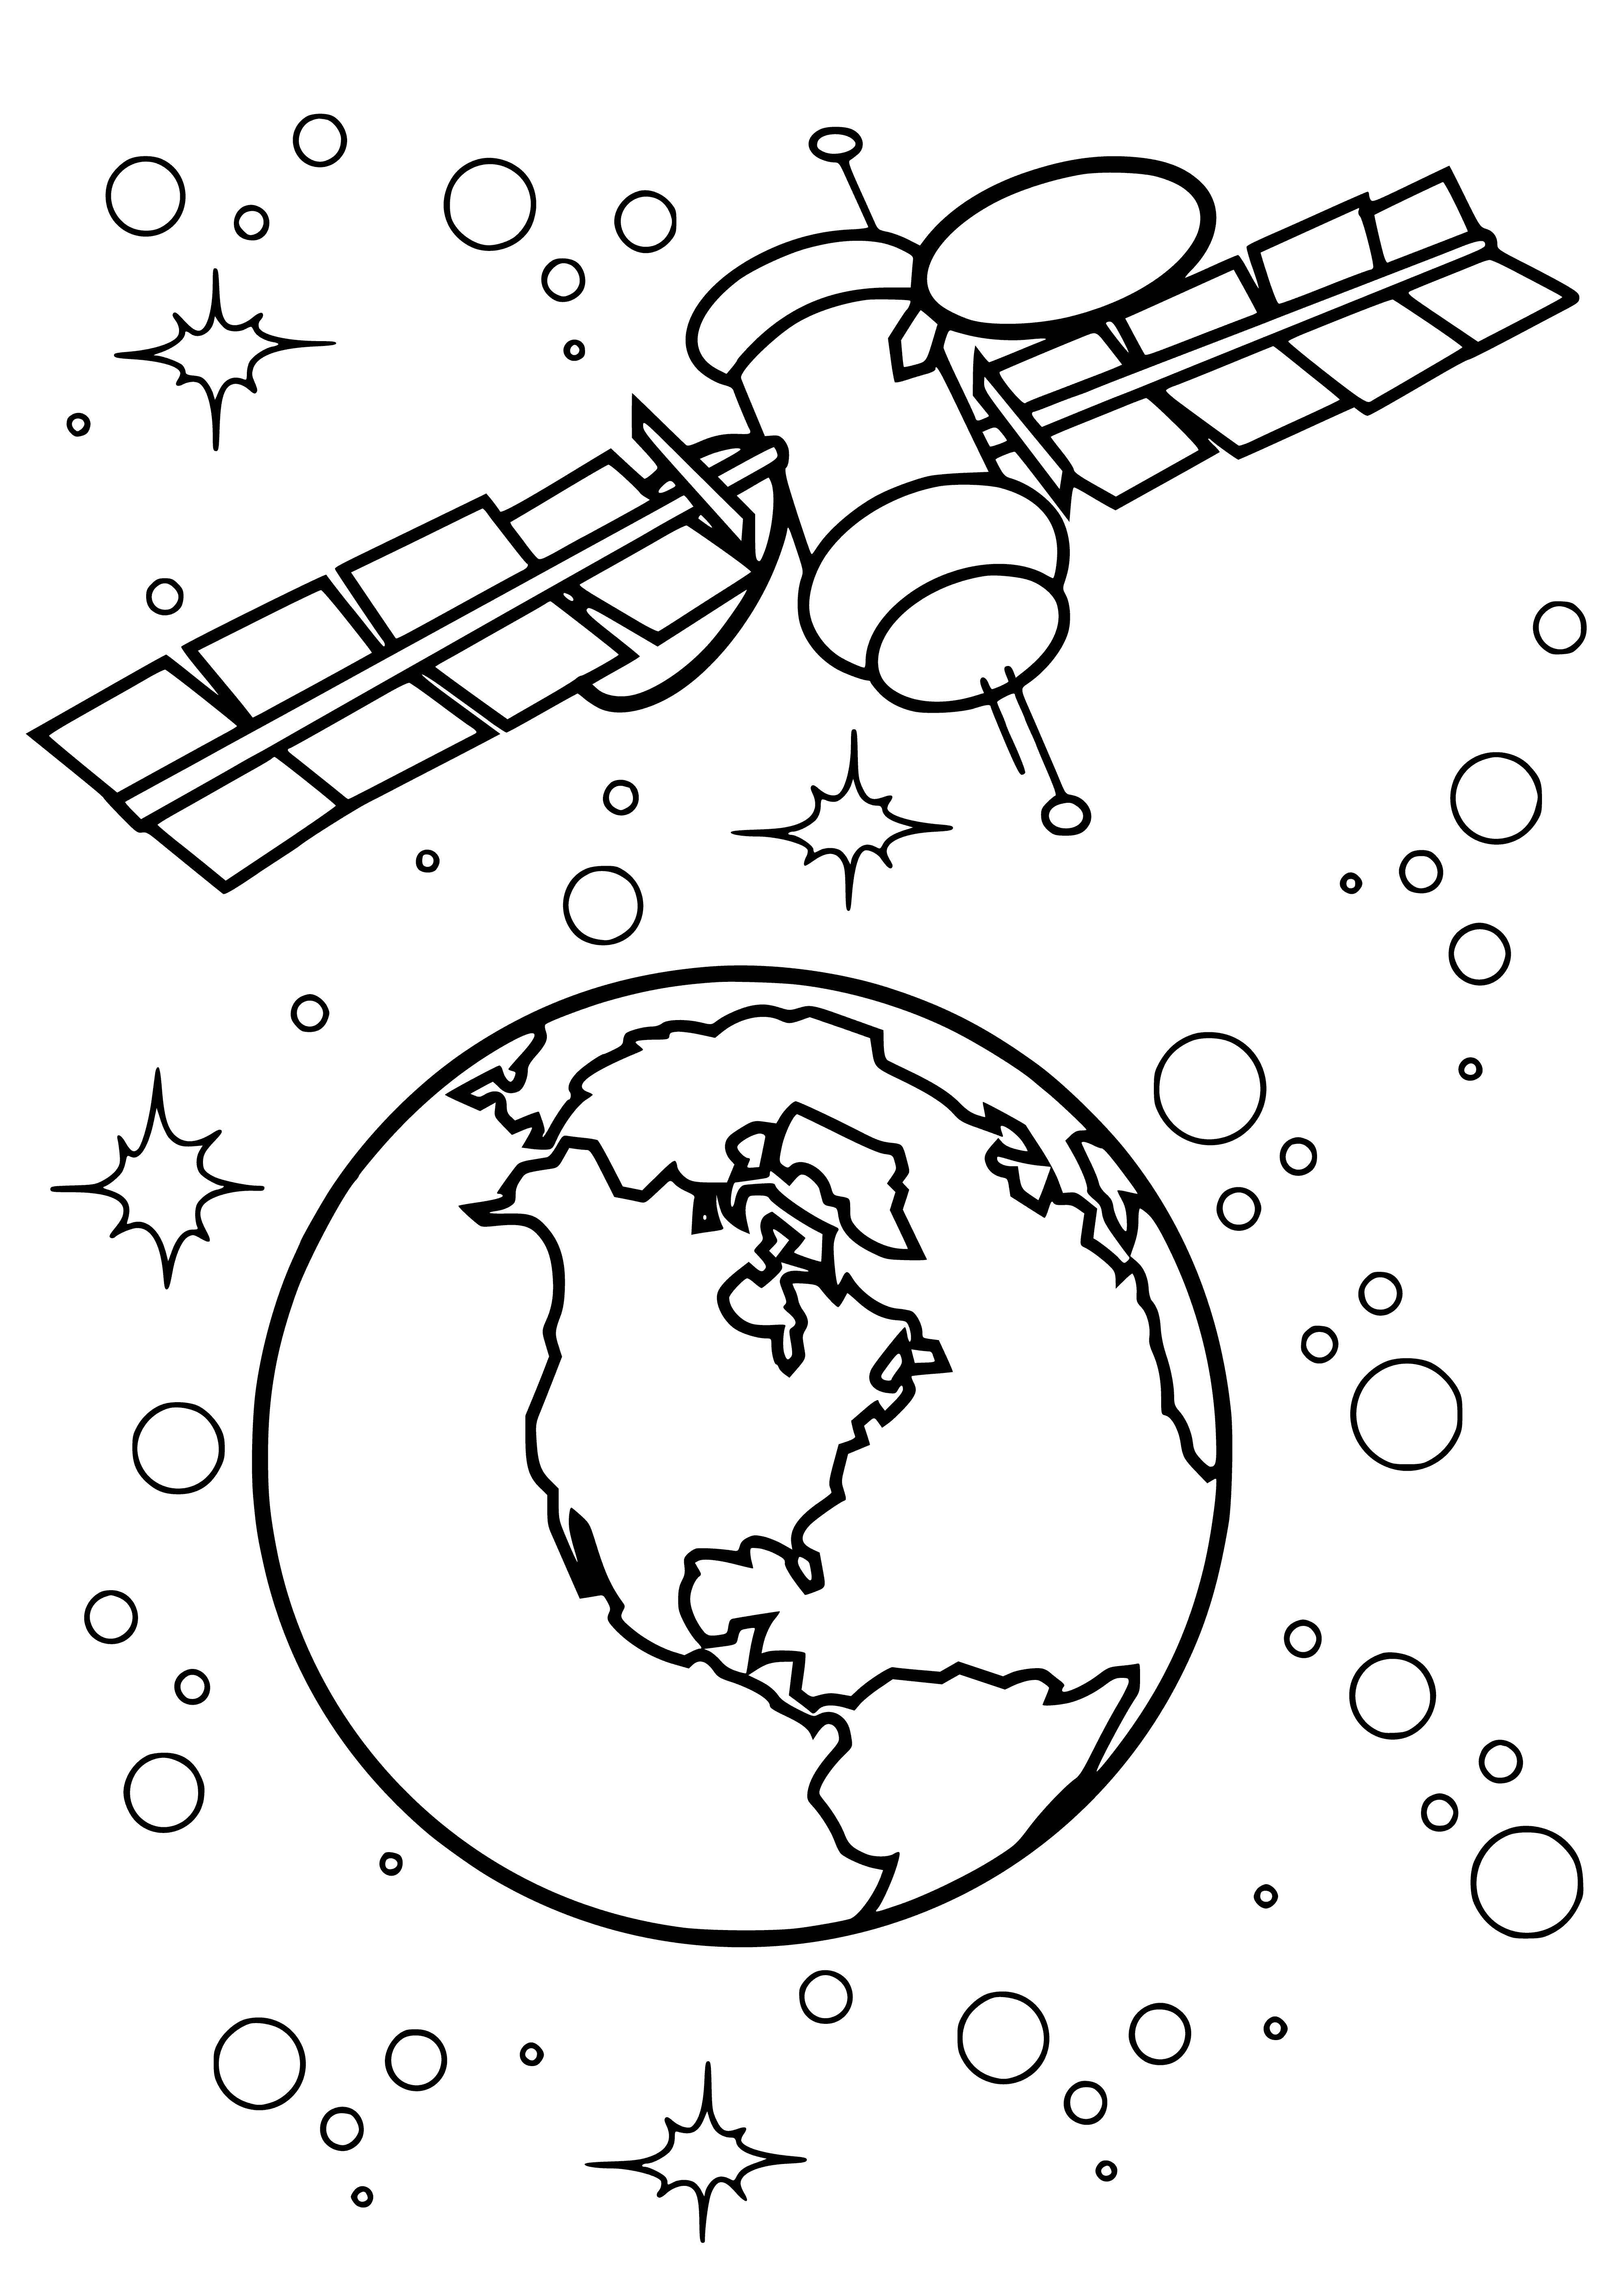 coloring page: Space station orbits planet w/large windows & smaller ships docked. People in space suits walking around. #spacestation